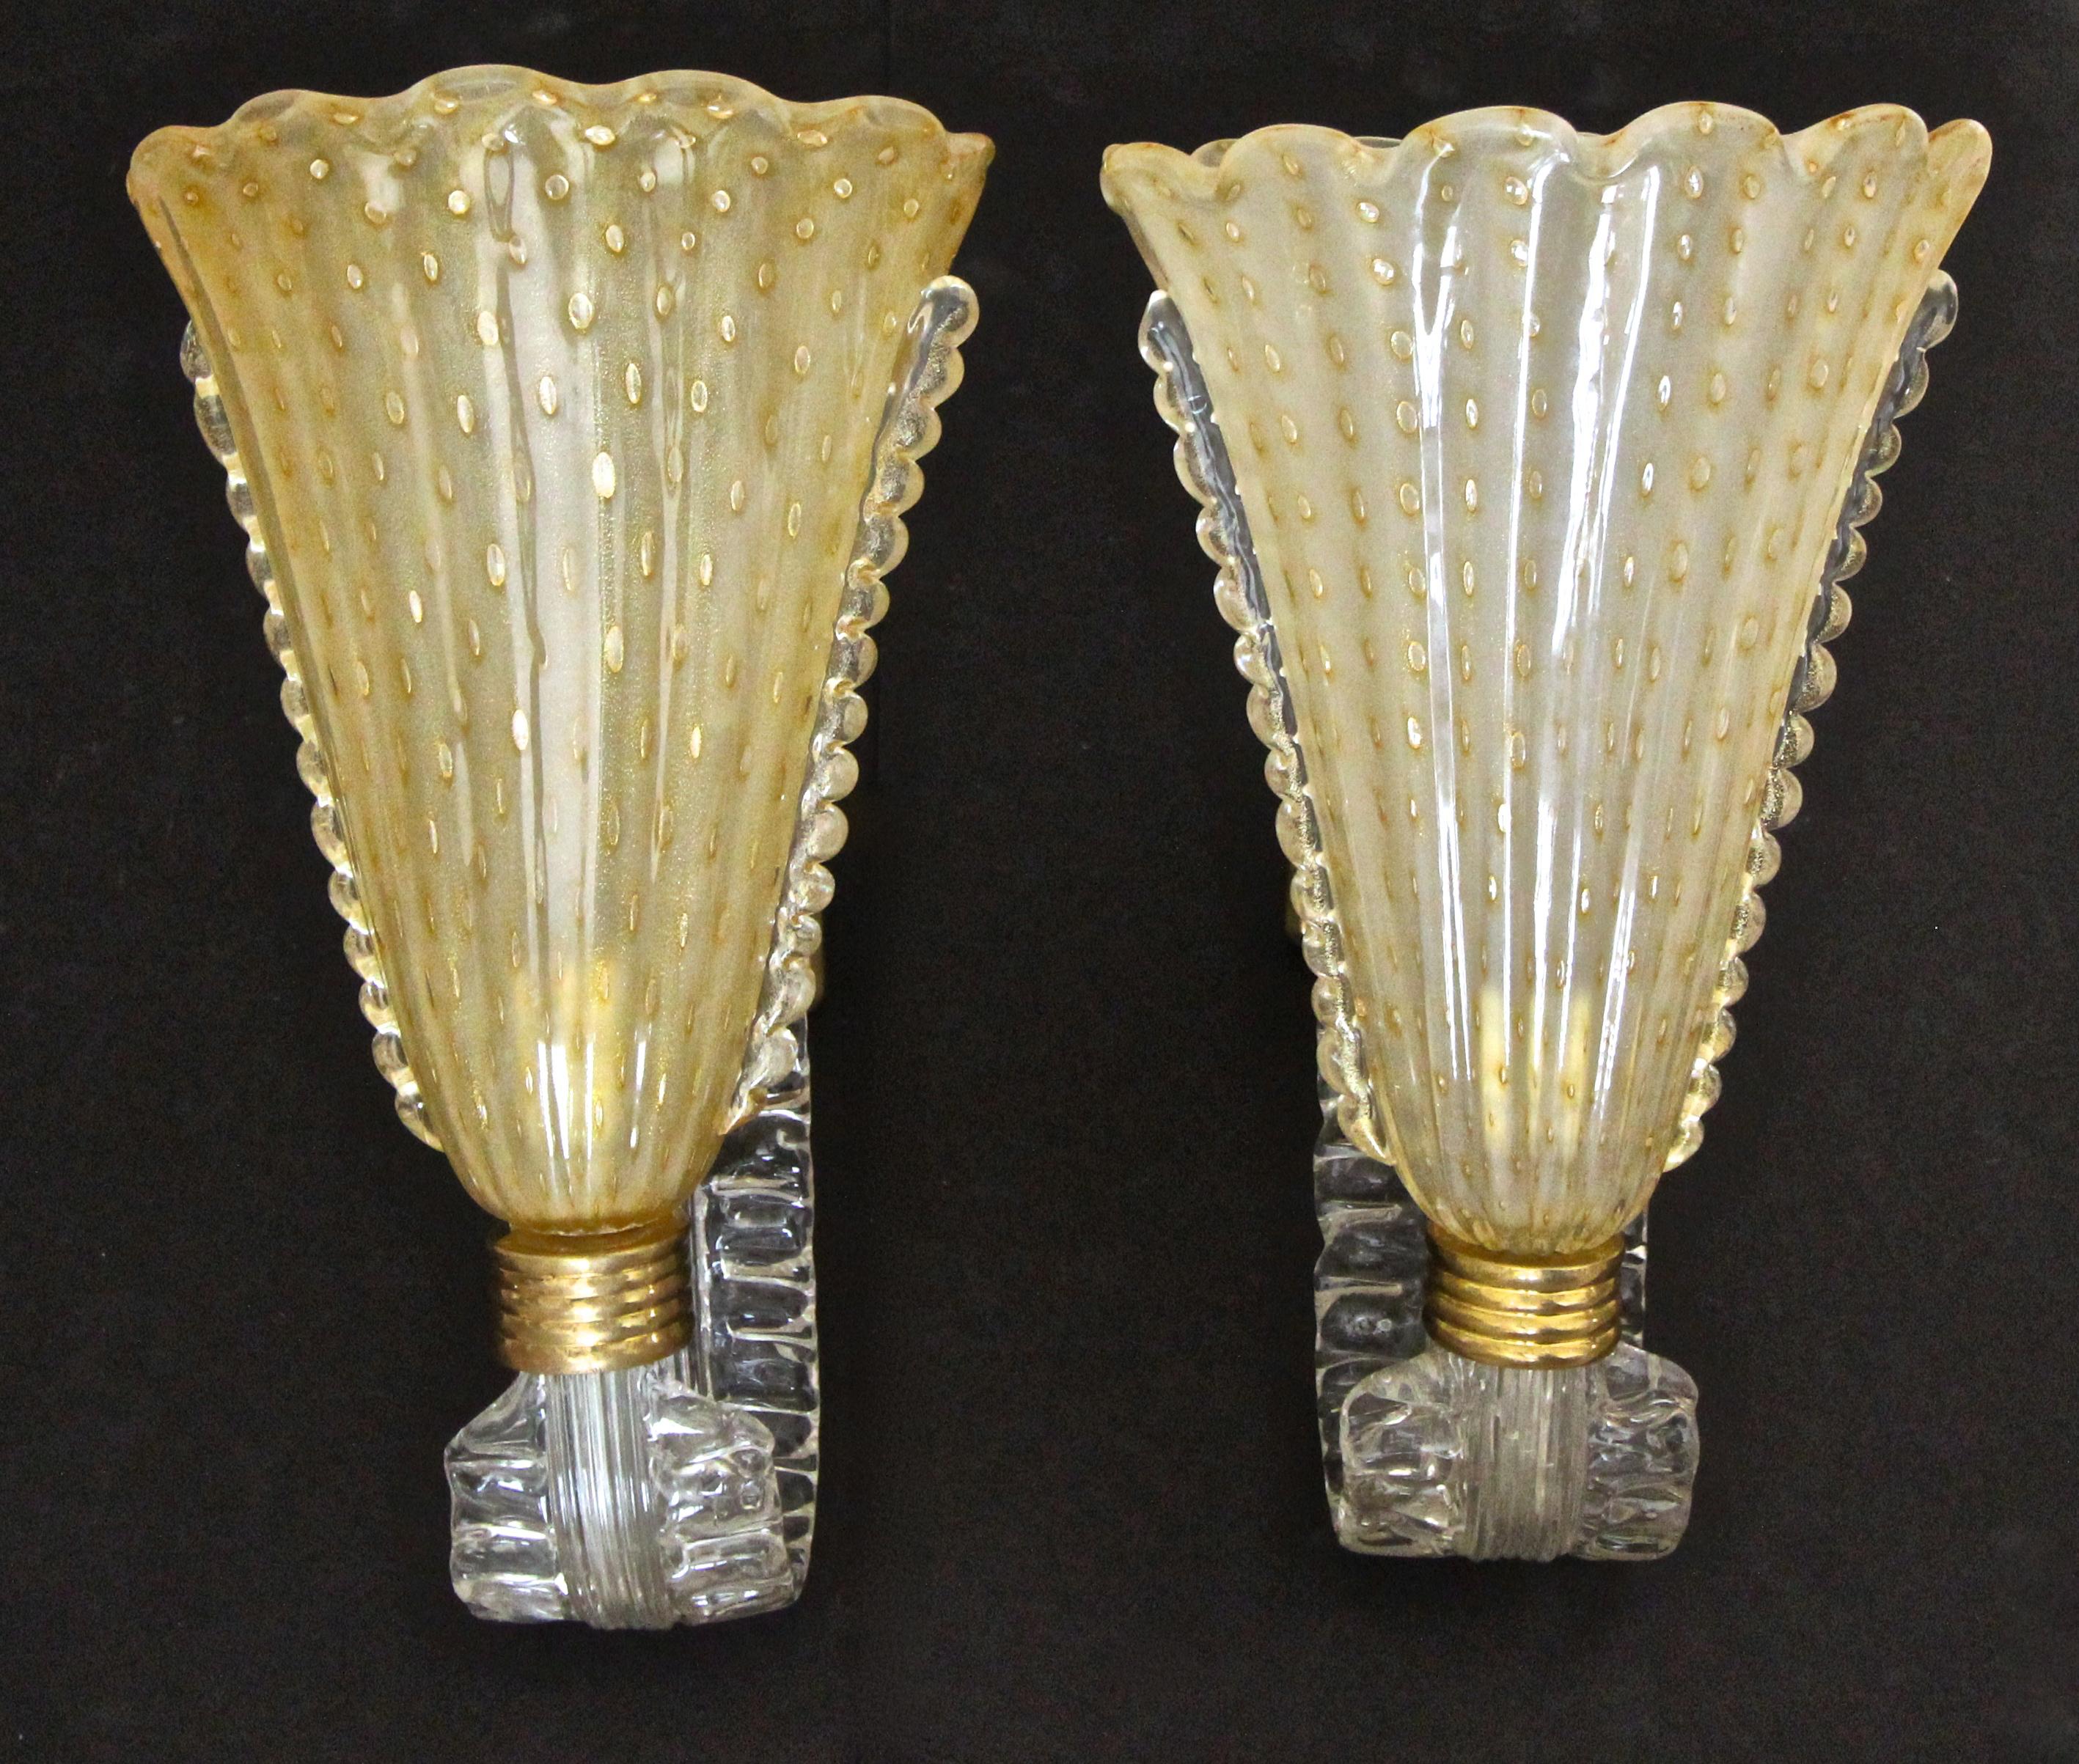 Exceptional pair of large Murano art glass wall sconces. Italian handblown gold glass shades with bullicante bubbles and gold inclusions mounted on S-curve clear glass arms. Brass fittings and backplates newly wired. Attributed to Barovier & Toso.